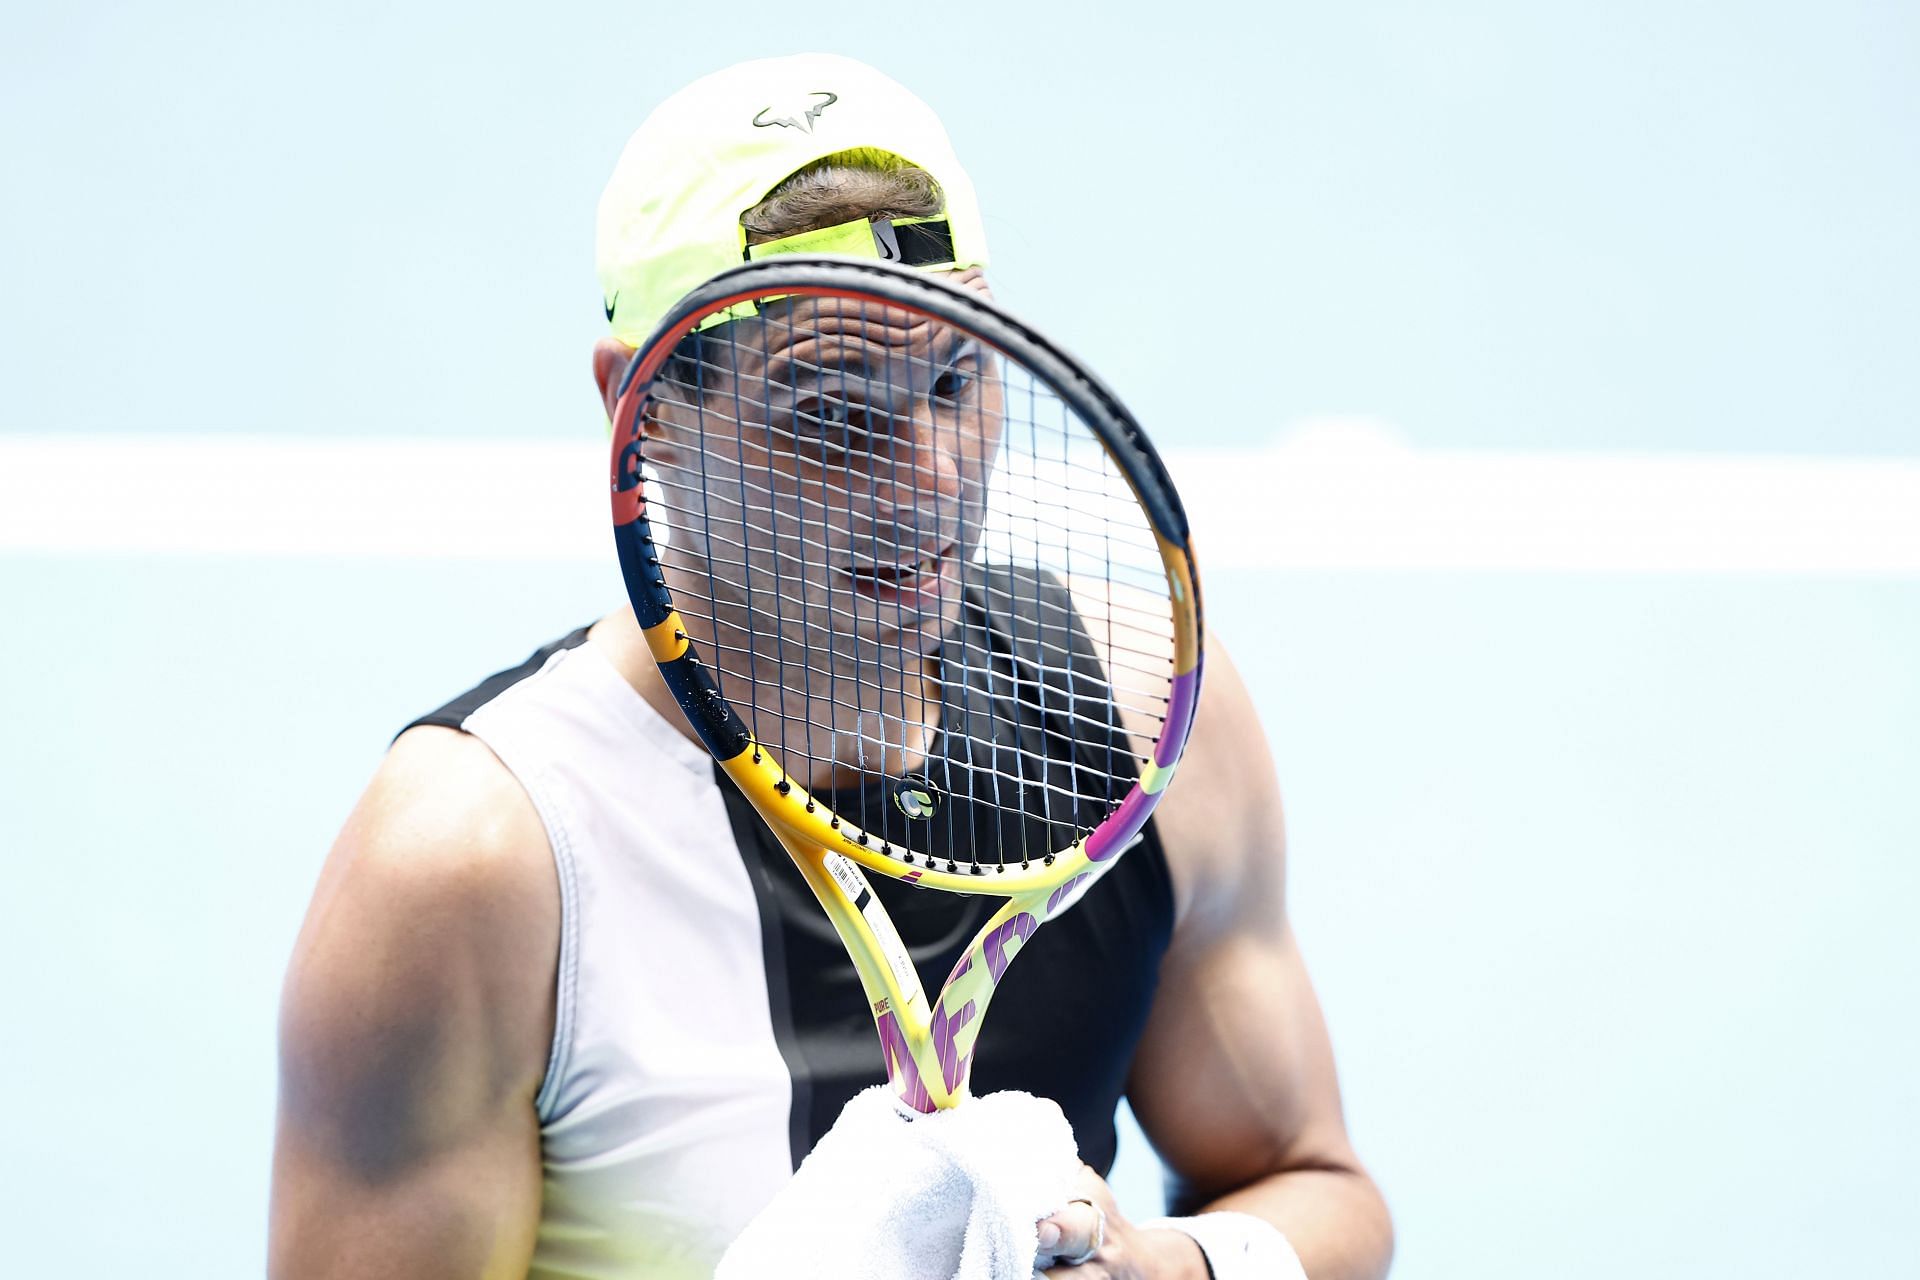 Rafael Nadal during a practice session